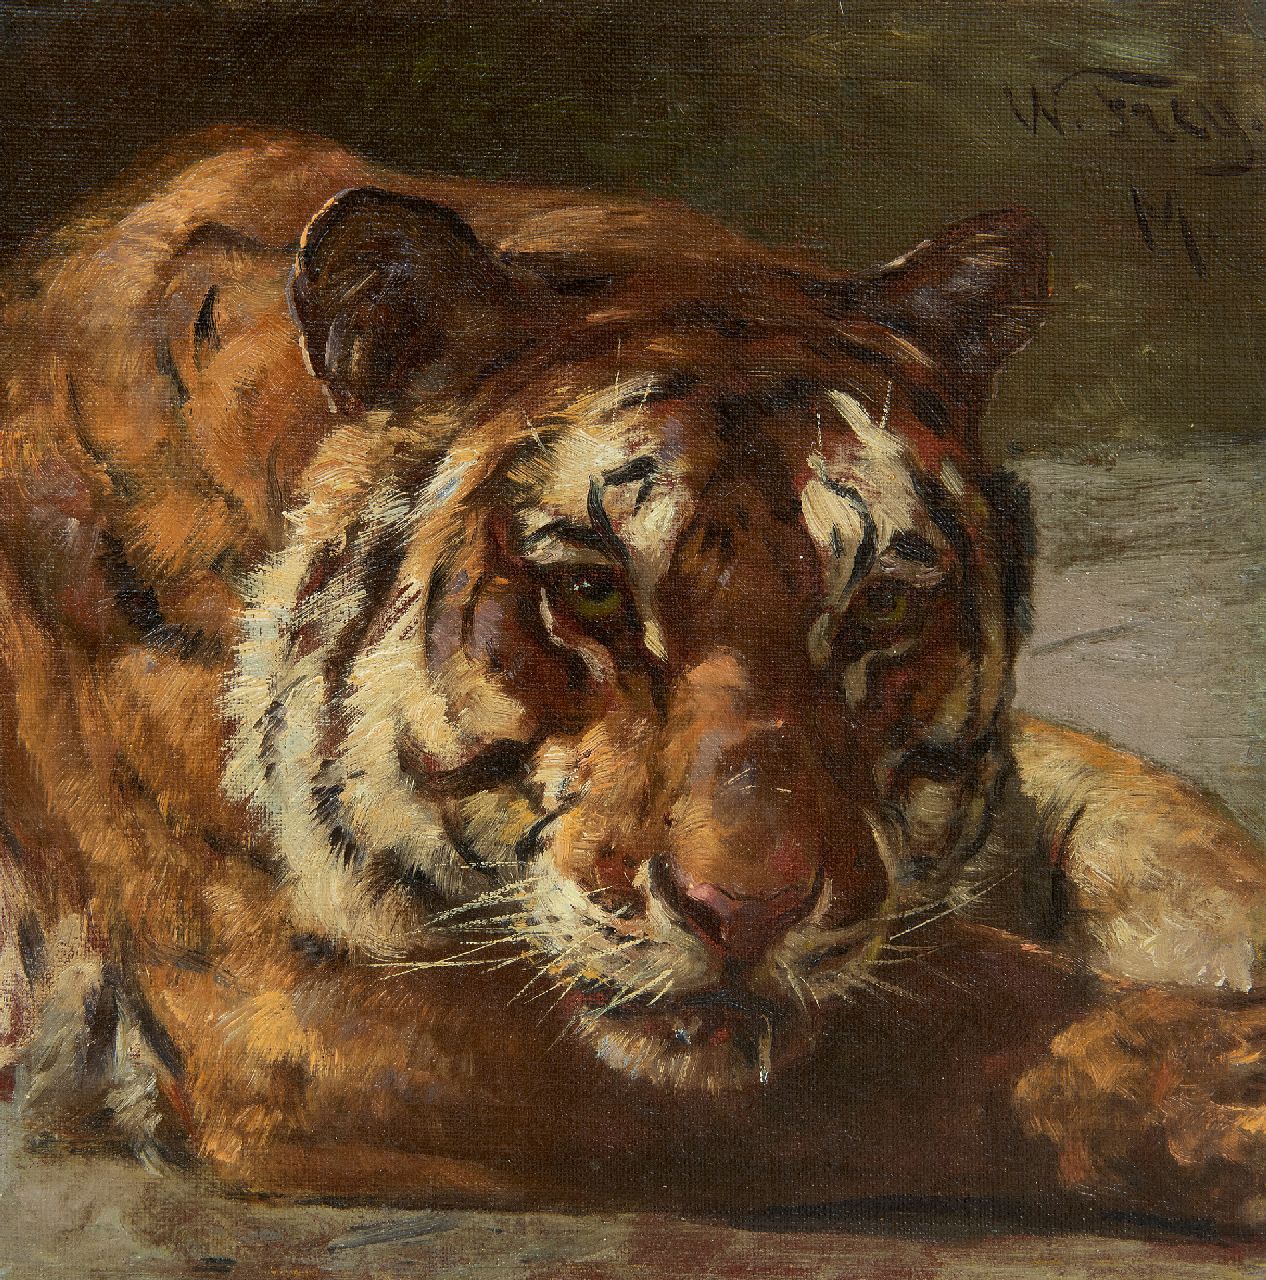 Frey W.  | Wilhelm Frey | Paintings offered for sale | Tiger in Artis, oil on canvas laid down on board 25.0 x 24.9 cm, signed u.r.